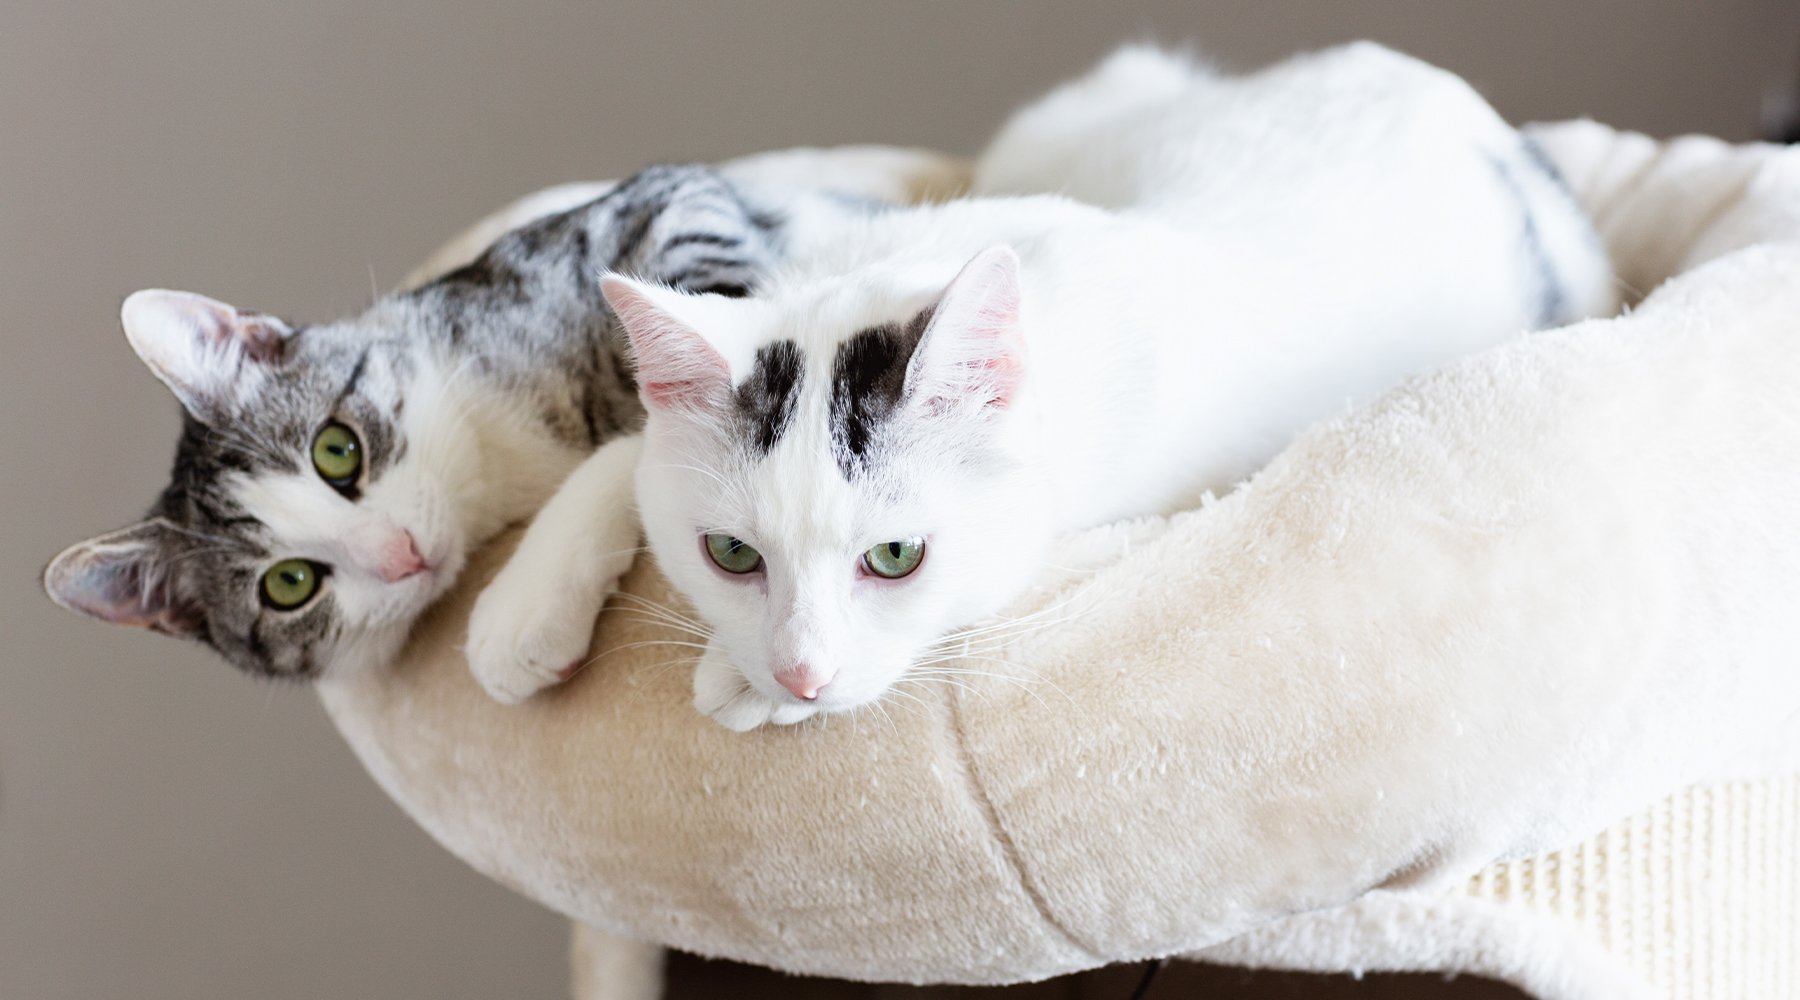 Two cats watching from a pet bed